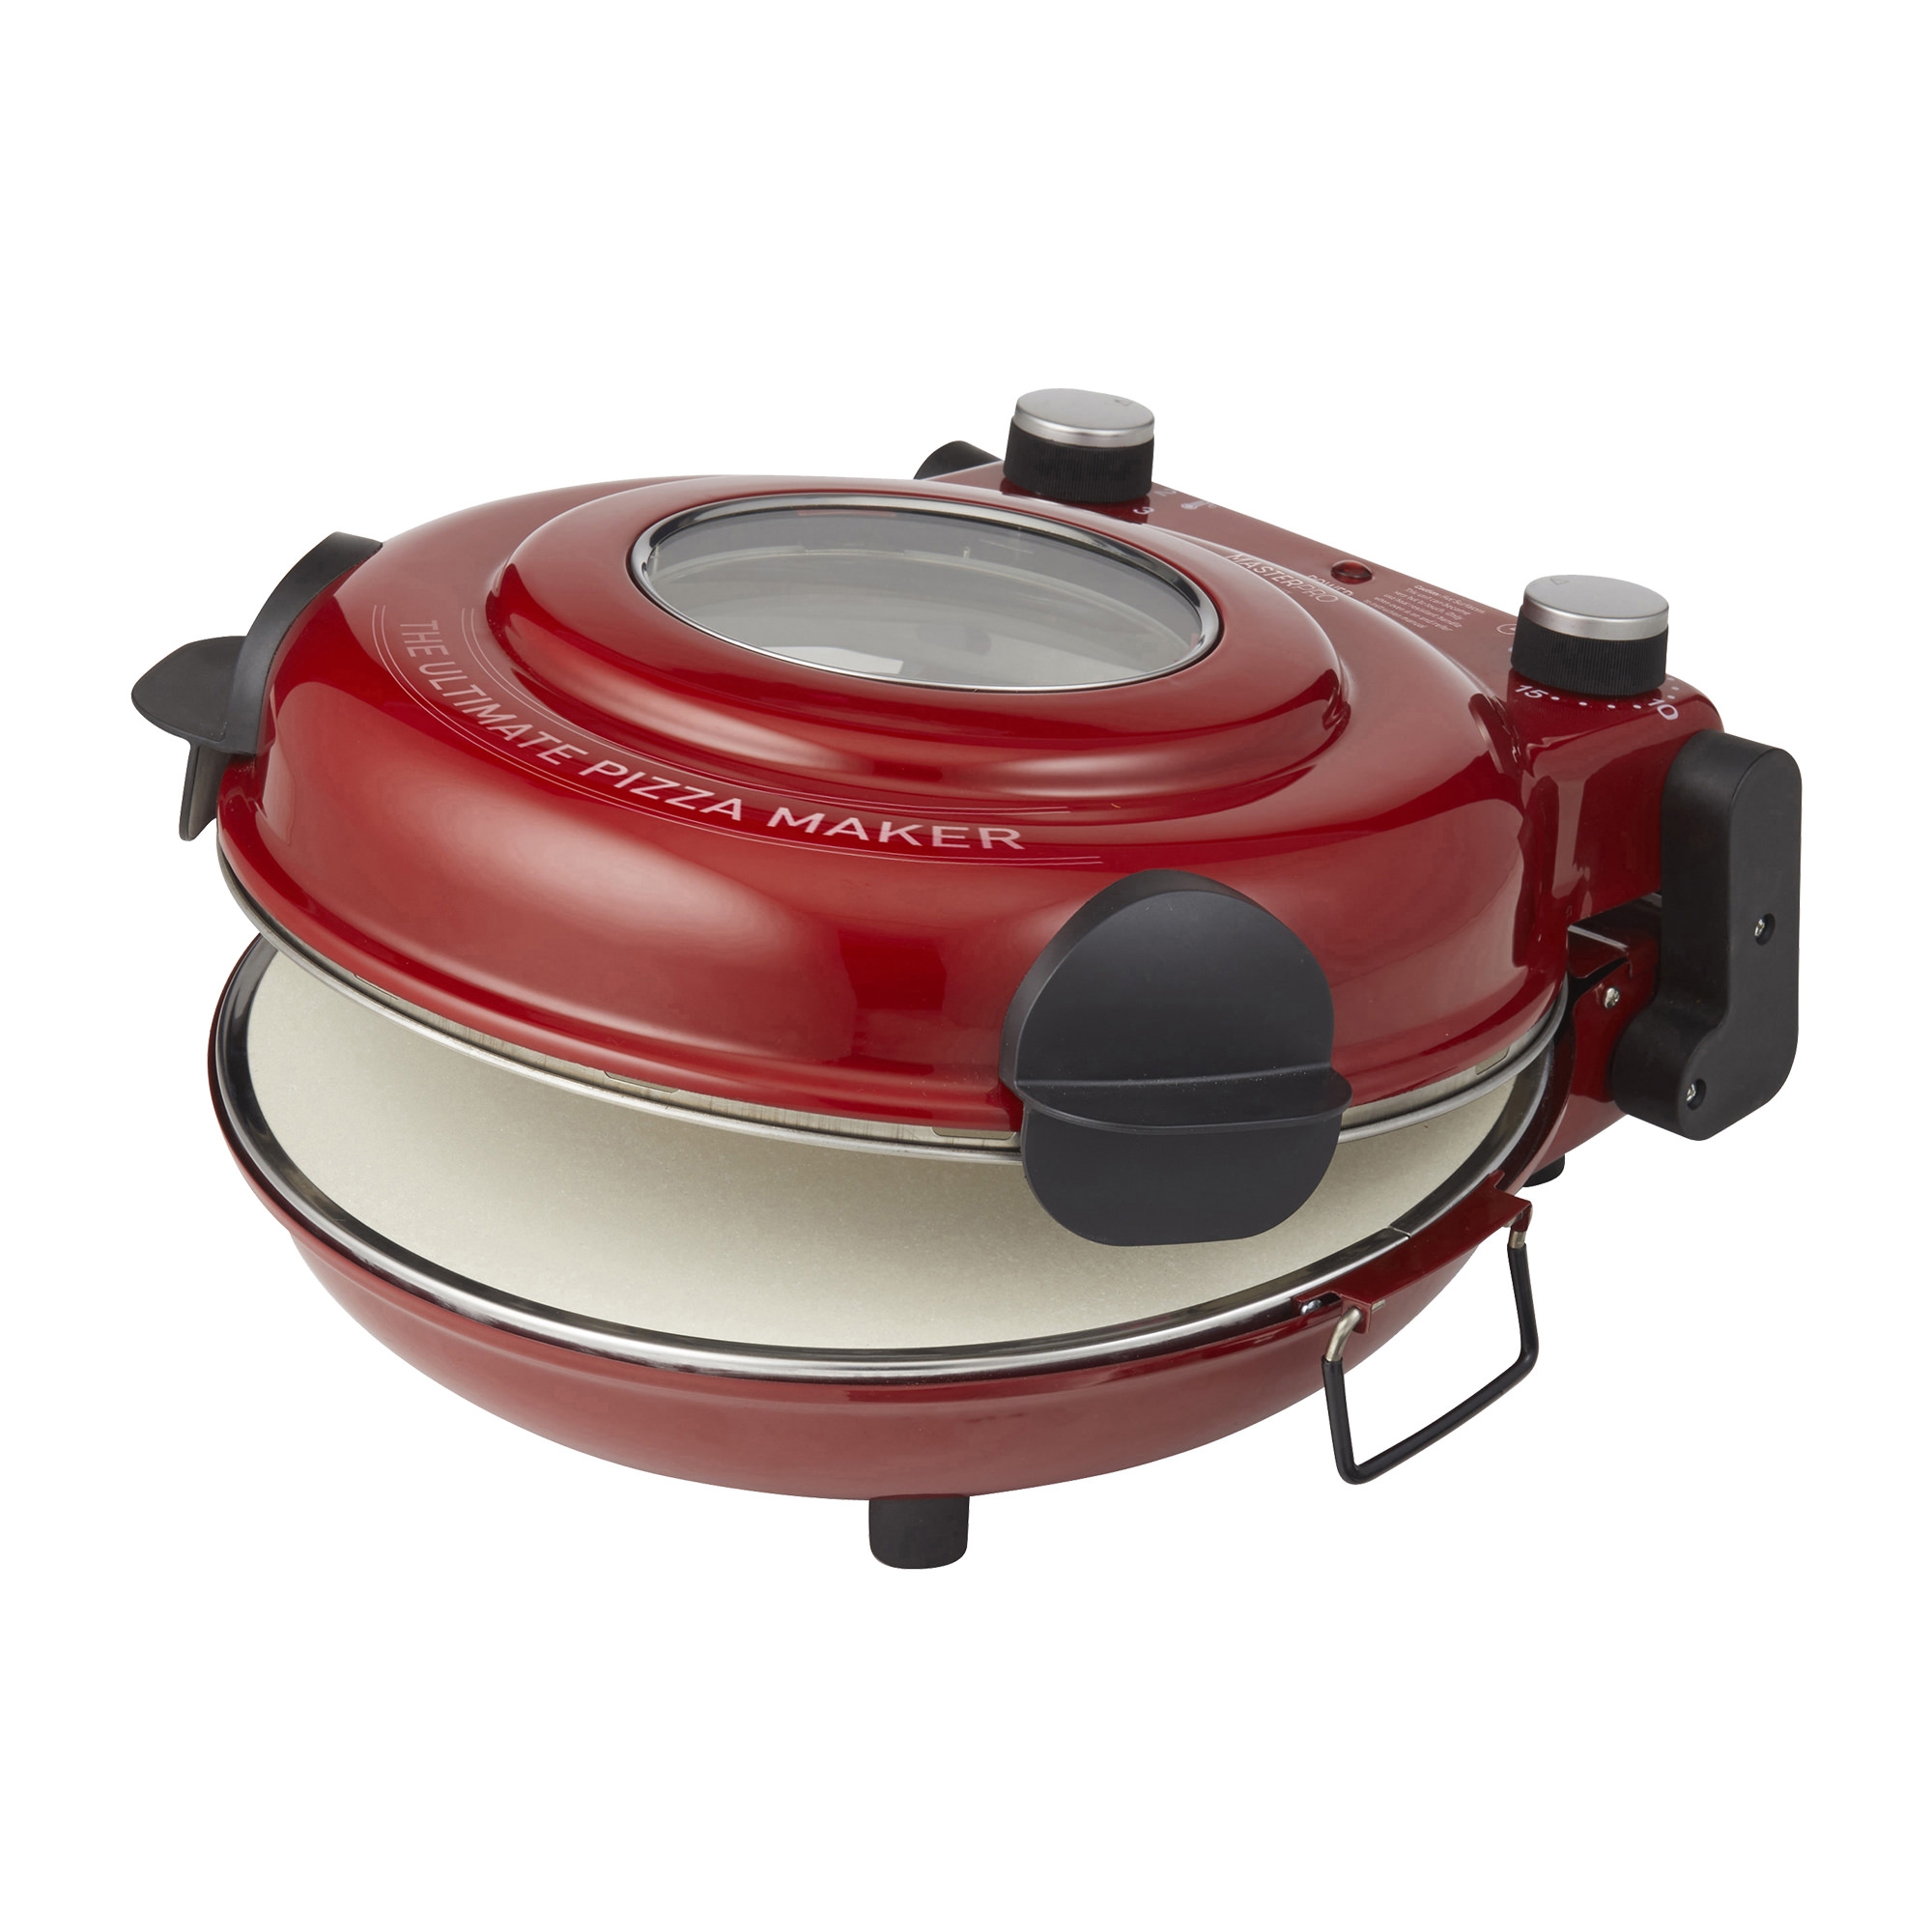 MasterPro Ultimate Pizza Oven Red Image 1